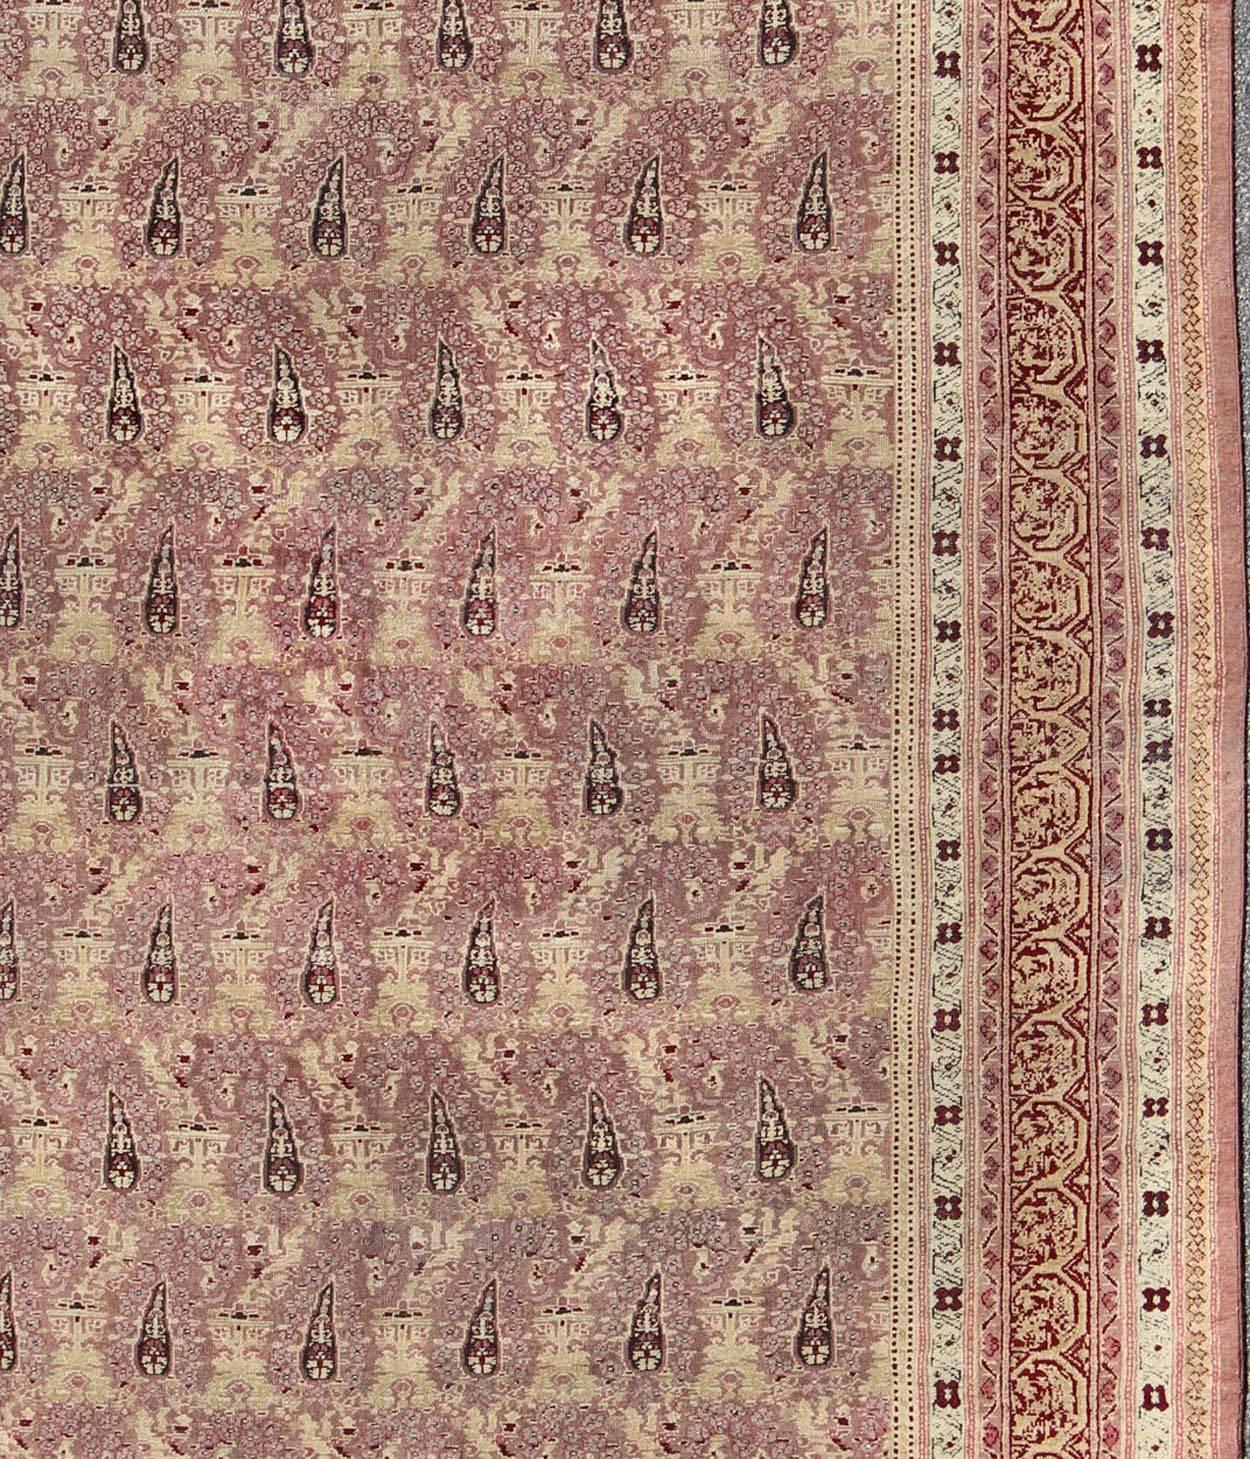 Agra Antique Amritsar Rug with Paisley Pattern in, Lavender, Purple, Pink & Yellow For Sale